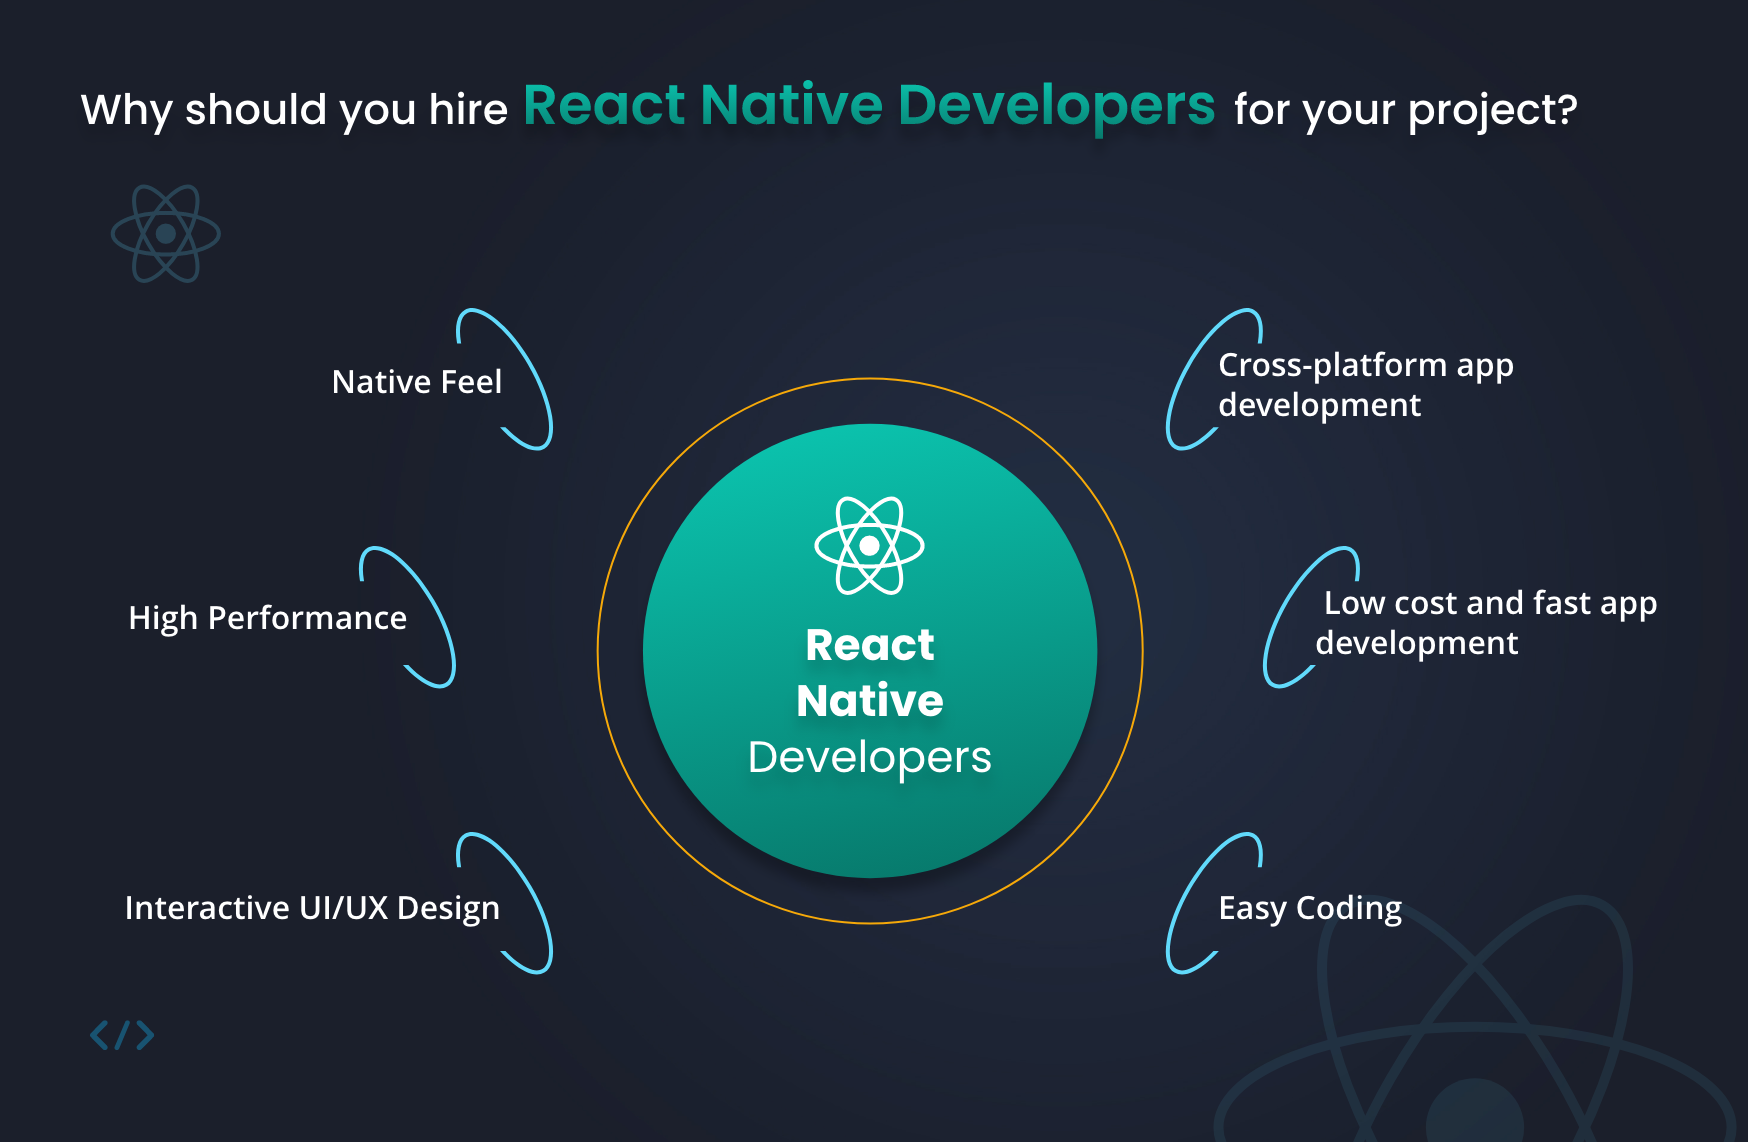 Why should you hire React Native developers for your project